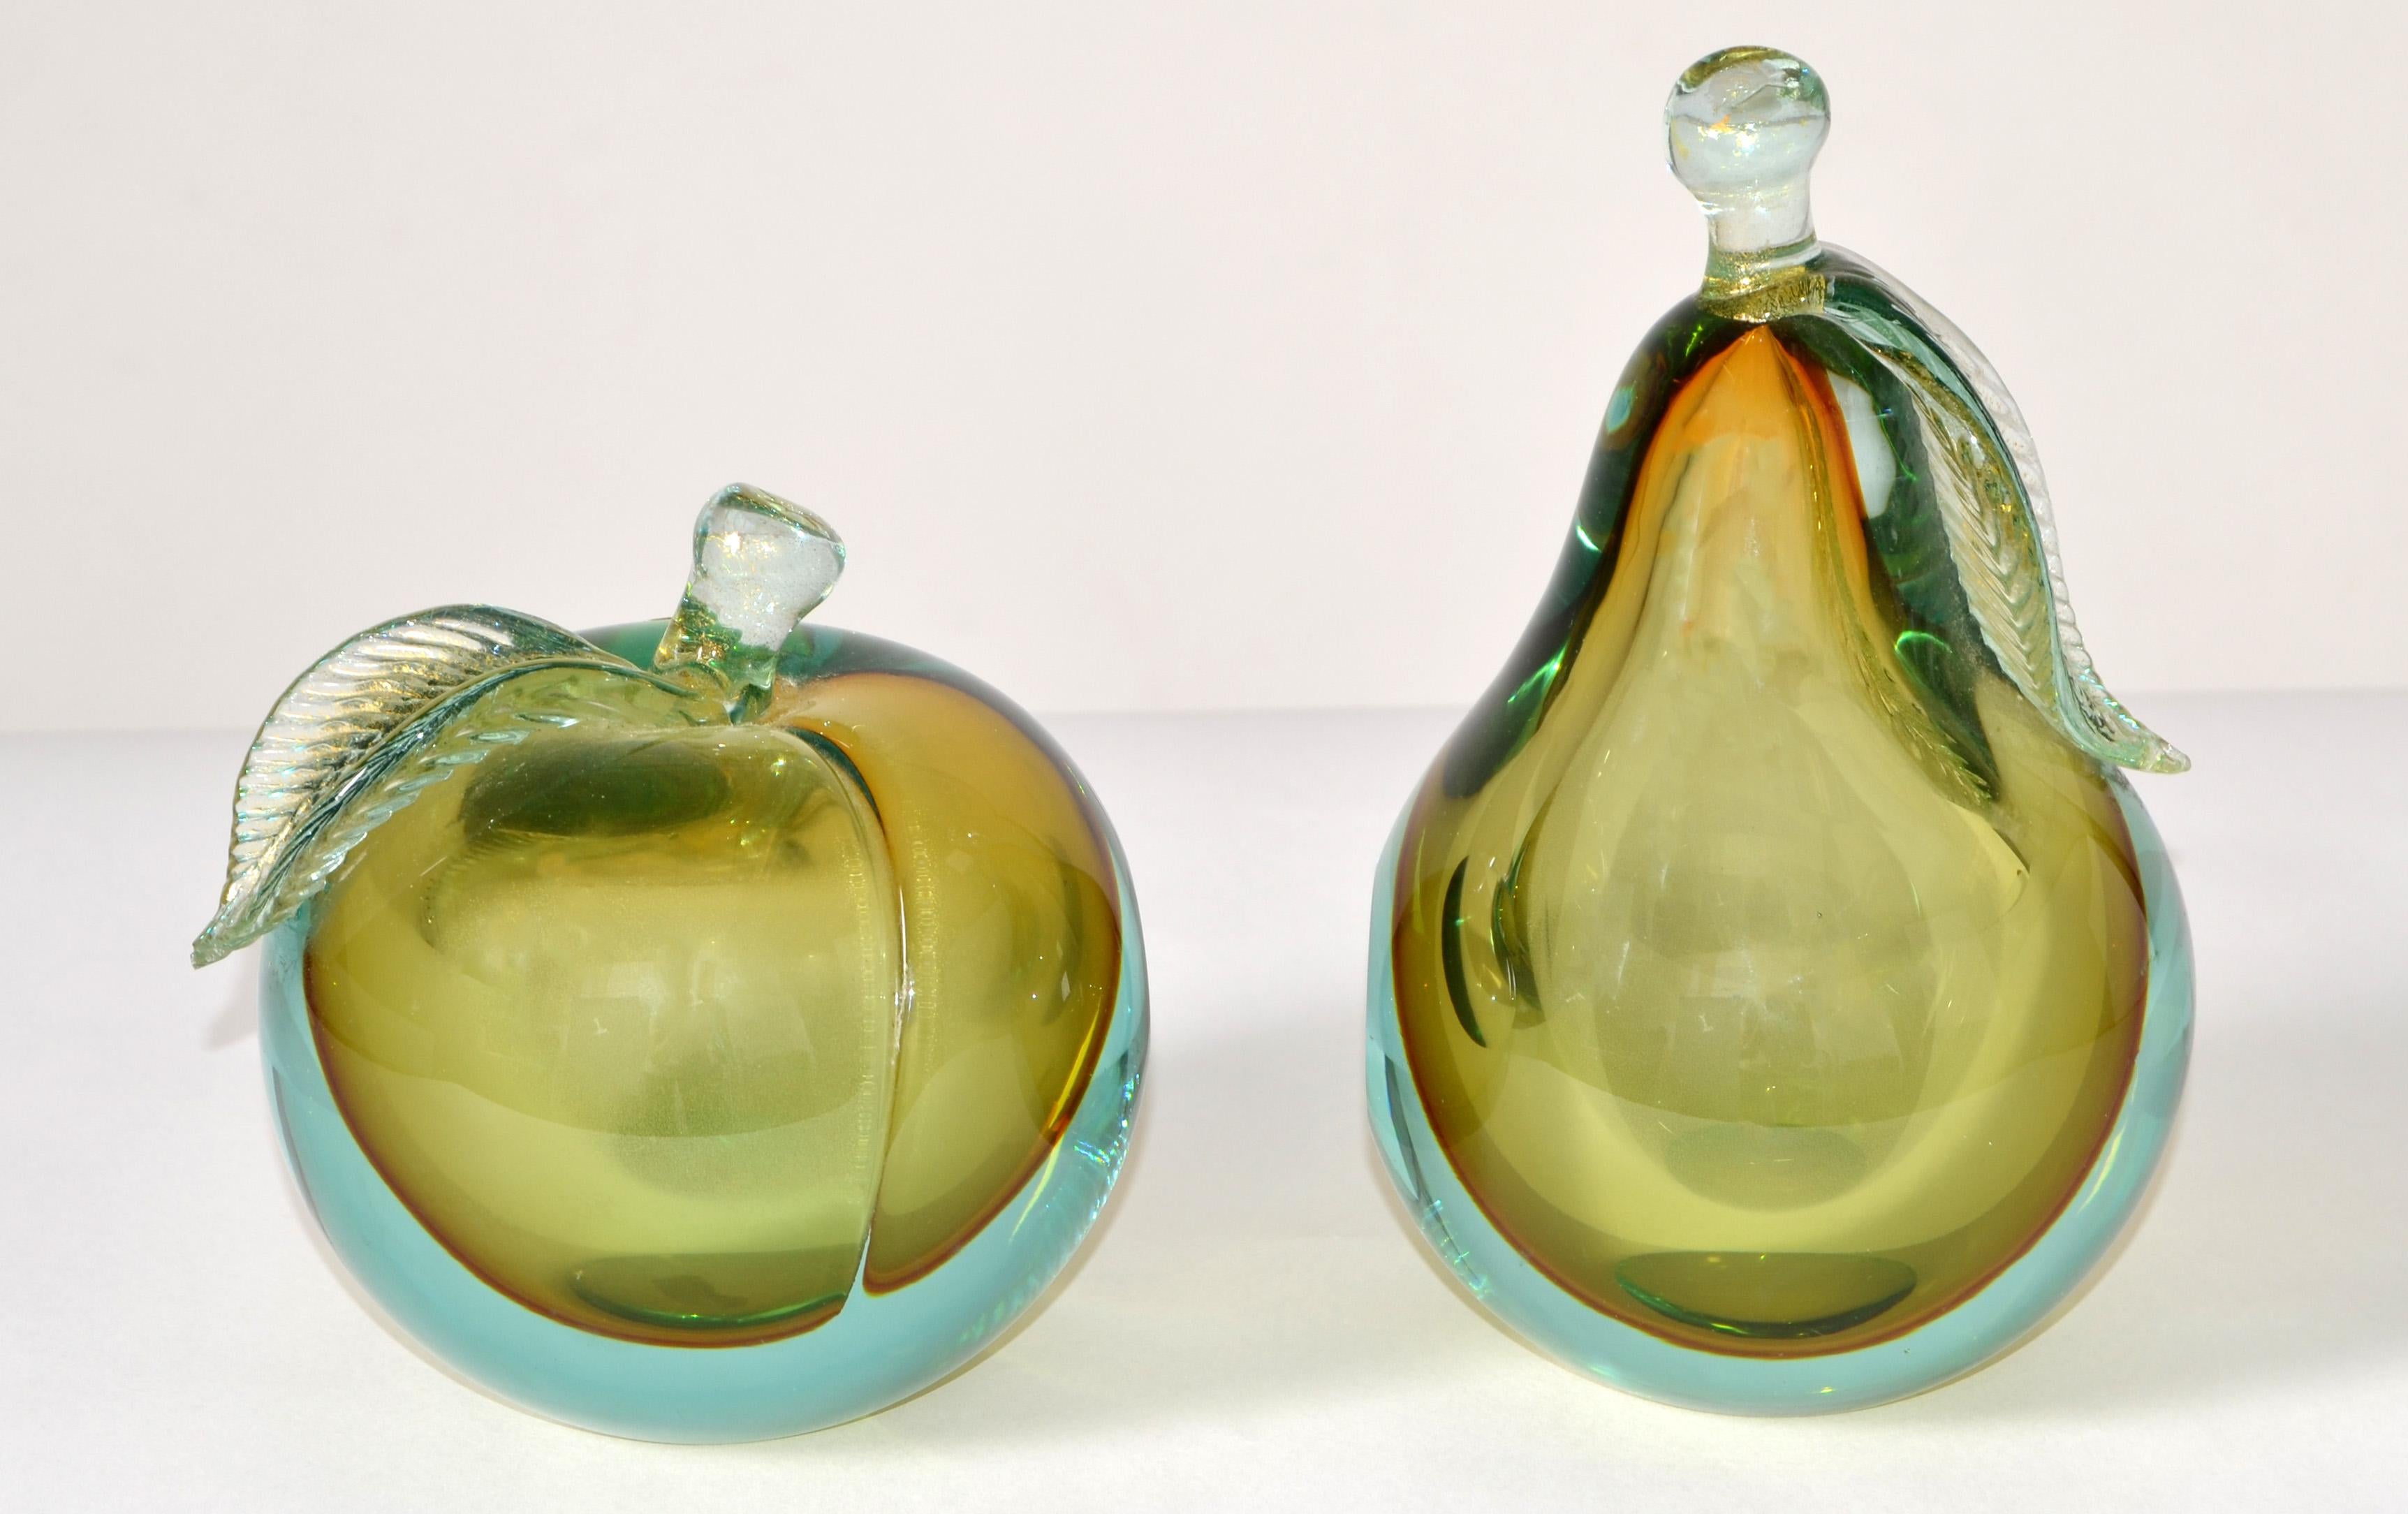 Genuine Venetian Murano Art Glass Apple and Pear Figurine, Sculptures or Bookends.
Heavy gold-filled glass with gold speckled leaves and stem each with a polished side and bottom. 
Unreadable Original Gold Label at the Apple and Parts of Blue